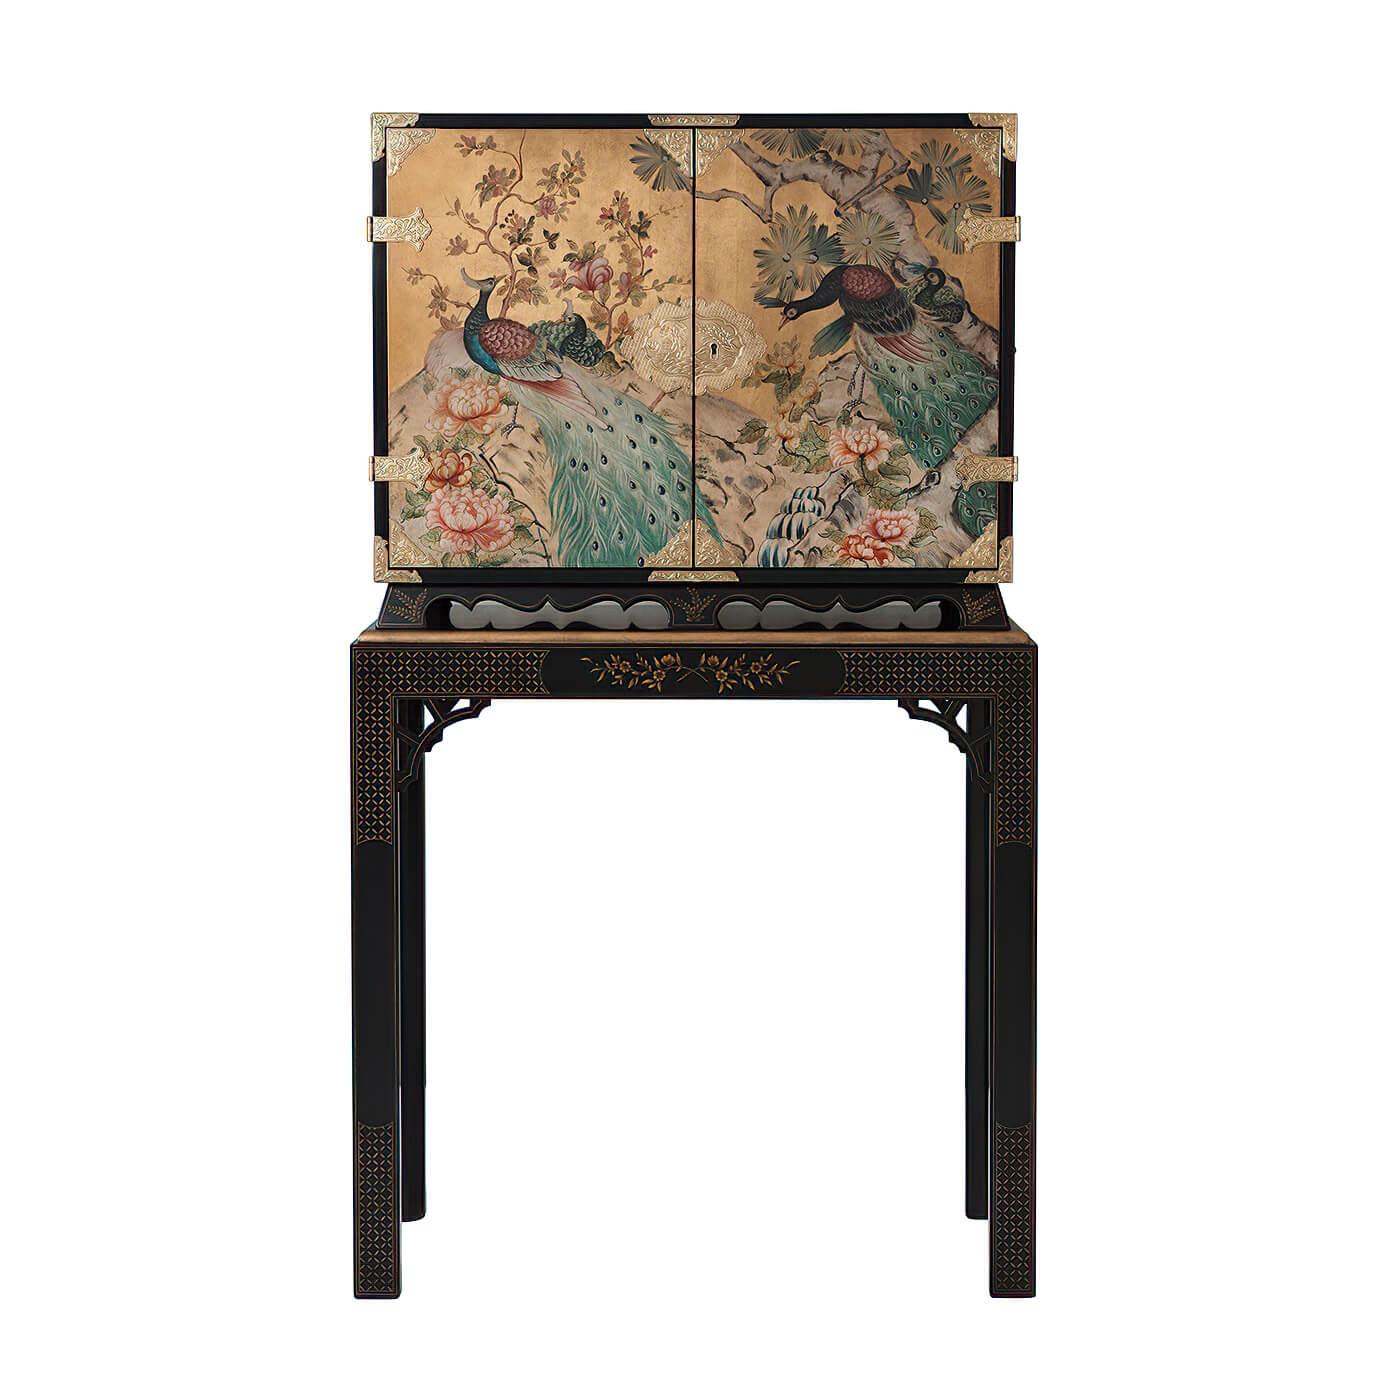 A finely hand-painted and black lacquered cabinet on stand, the cabinet with gold leaf and hand-painted decoration of peacocks in a landscape, with fine repousse chased brass mounts, on a base with chamfered legs and fretwork spandrels hand-painted